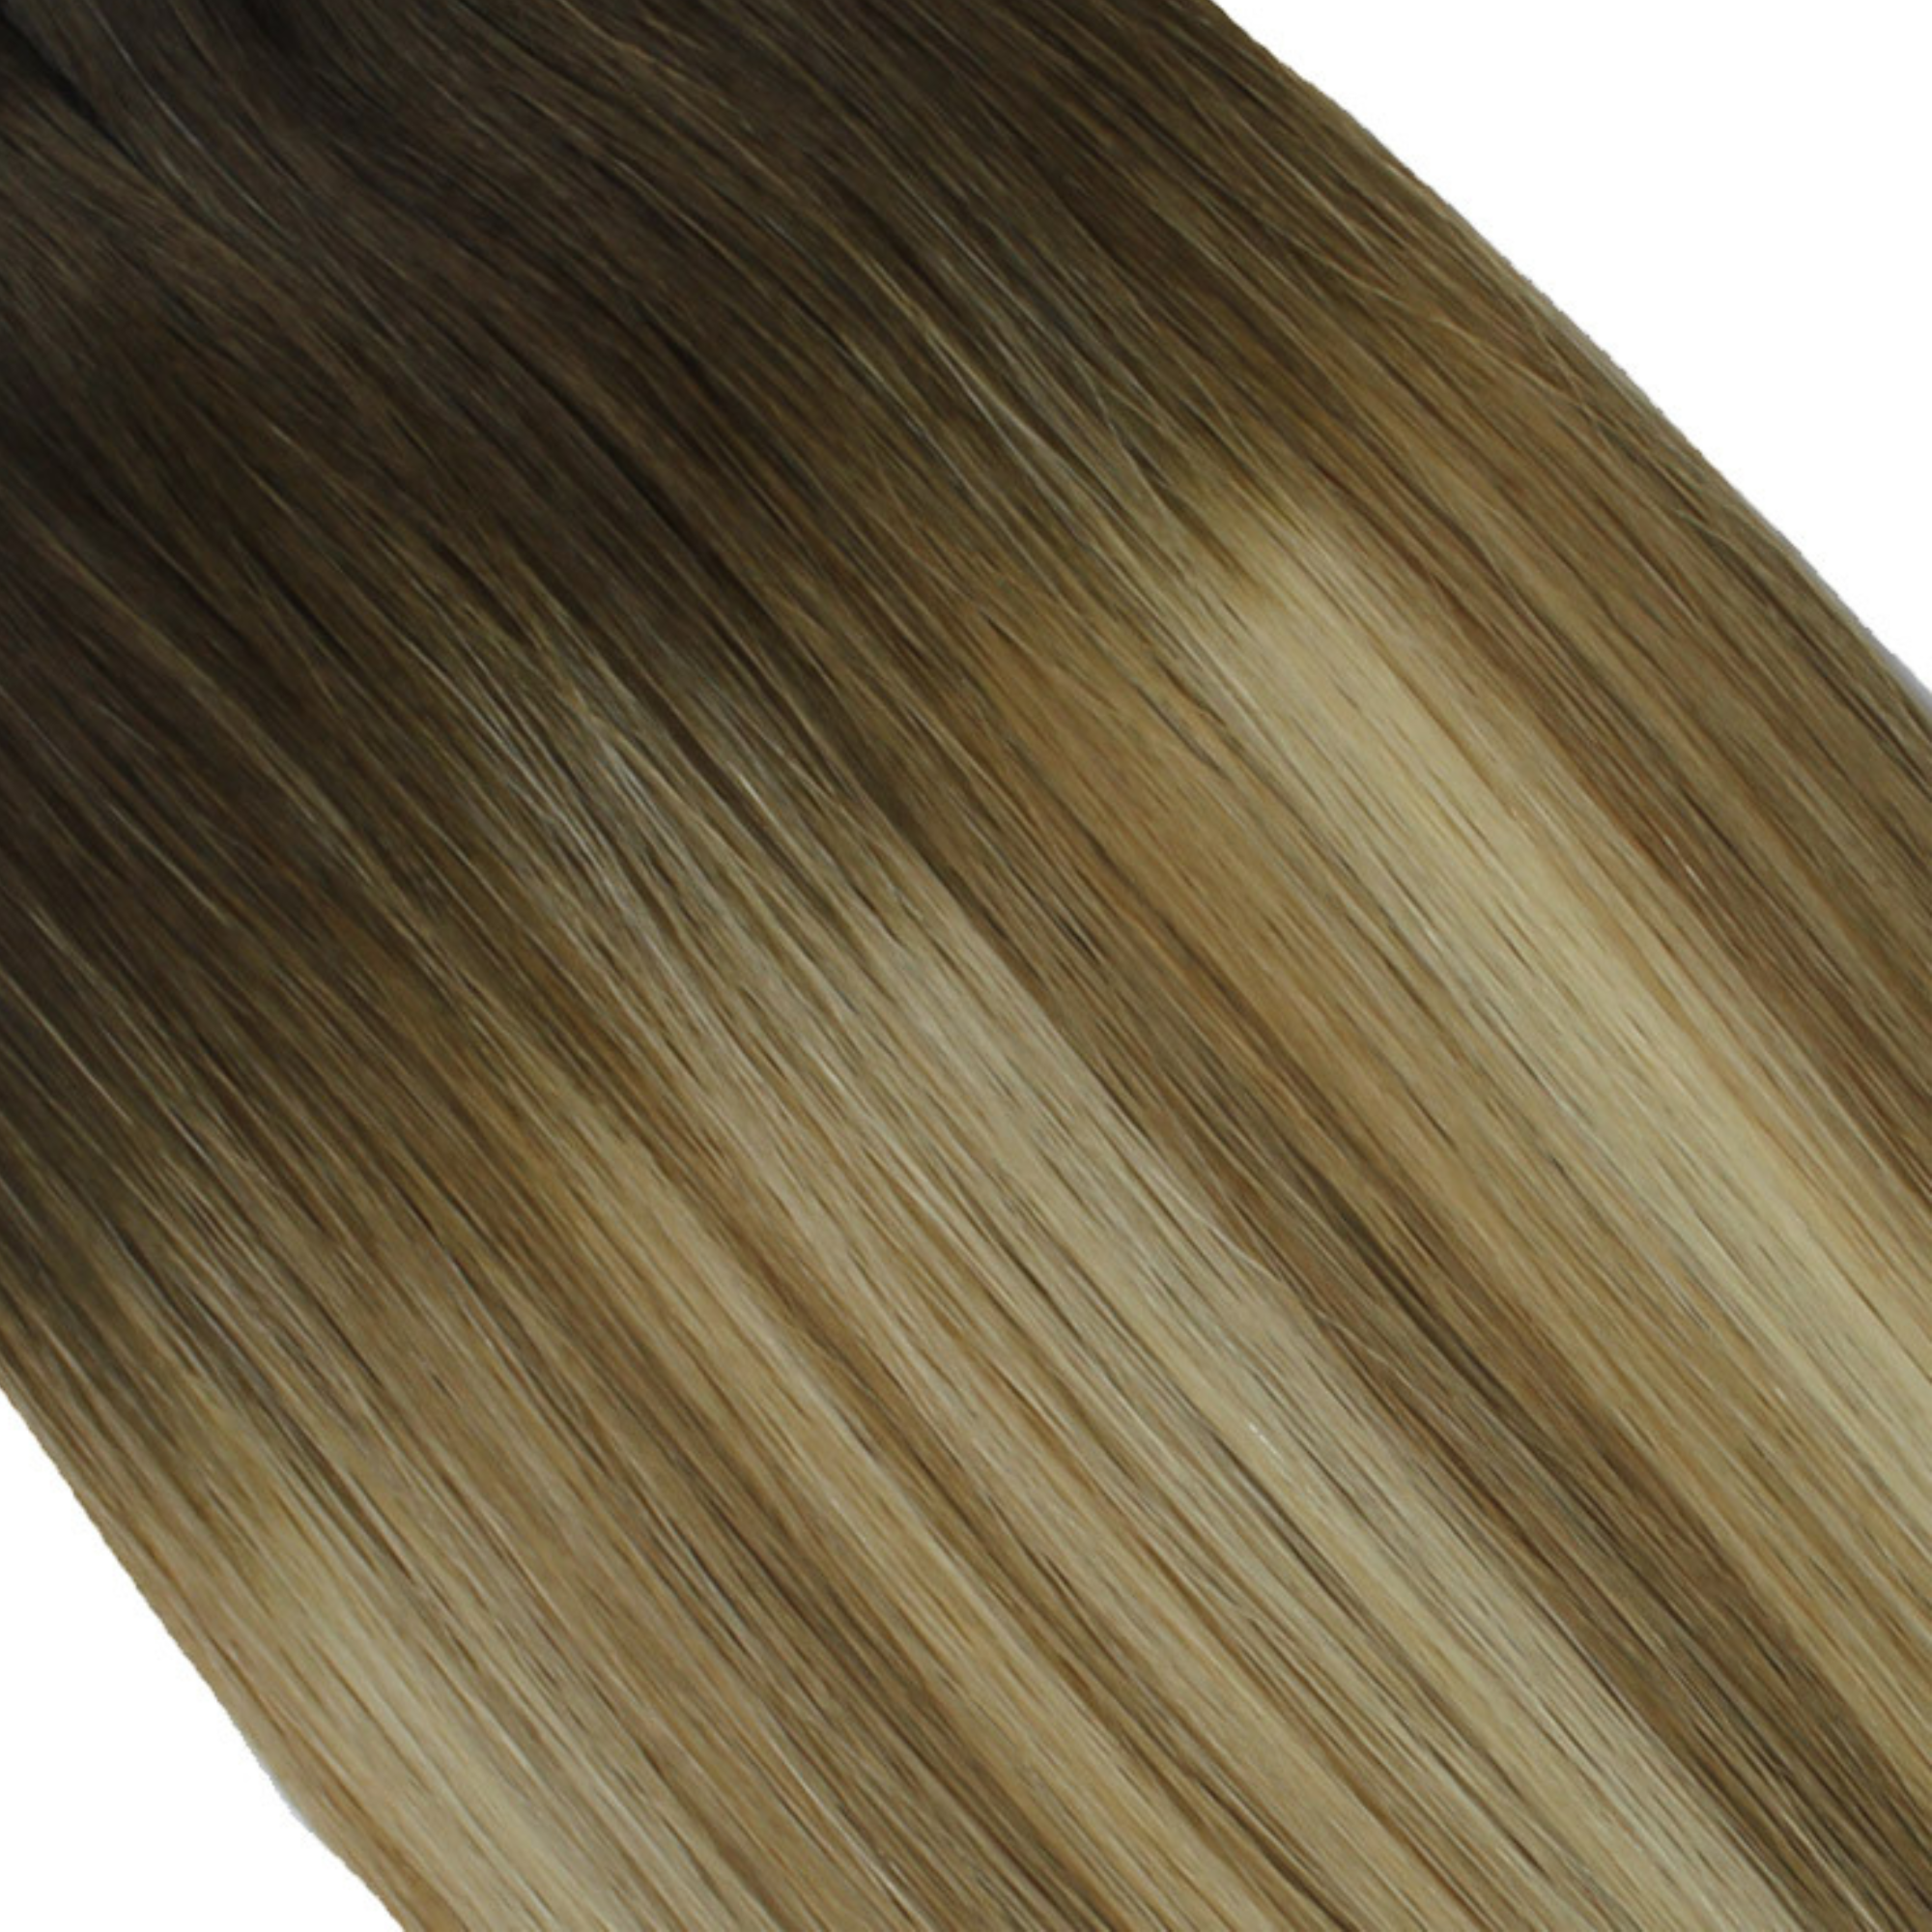 "hair rehab london 22" tape hair extensions shade swatch titled rooted supermodel"